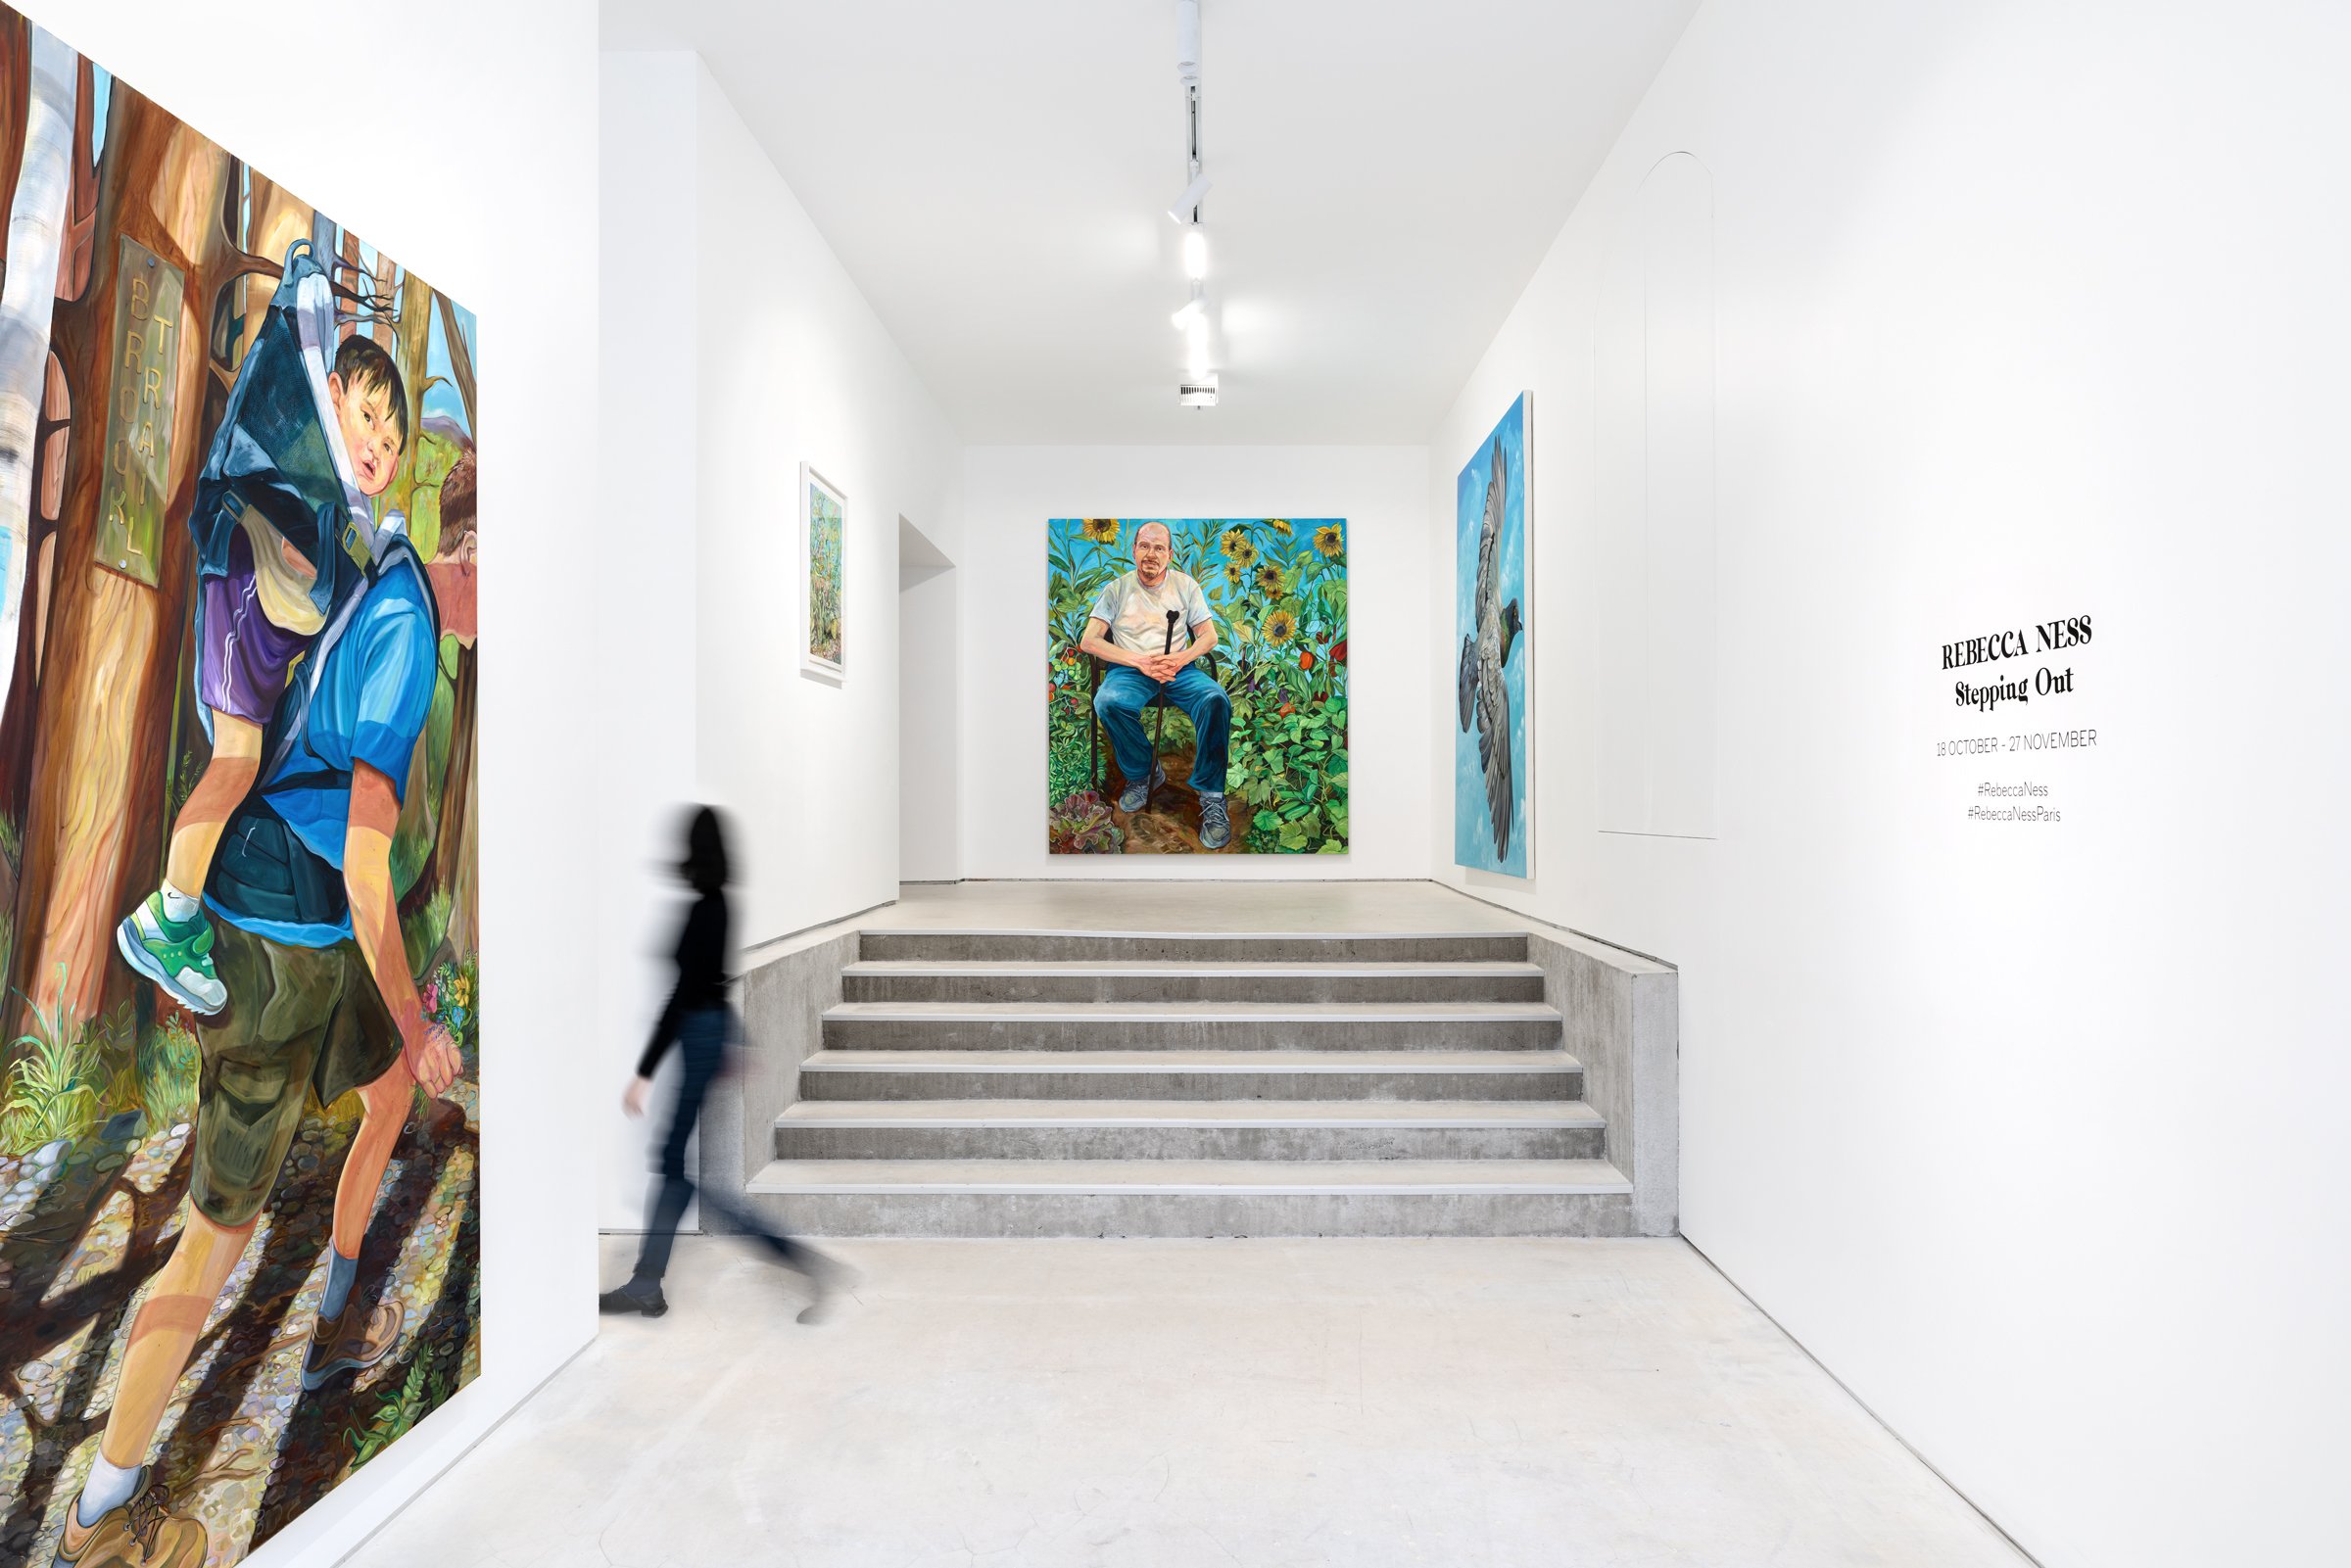  “Stepping Out” at Galerie Marguo; Photo: Mike Derez 